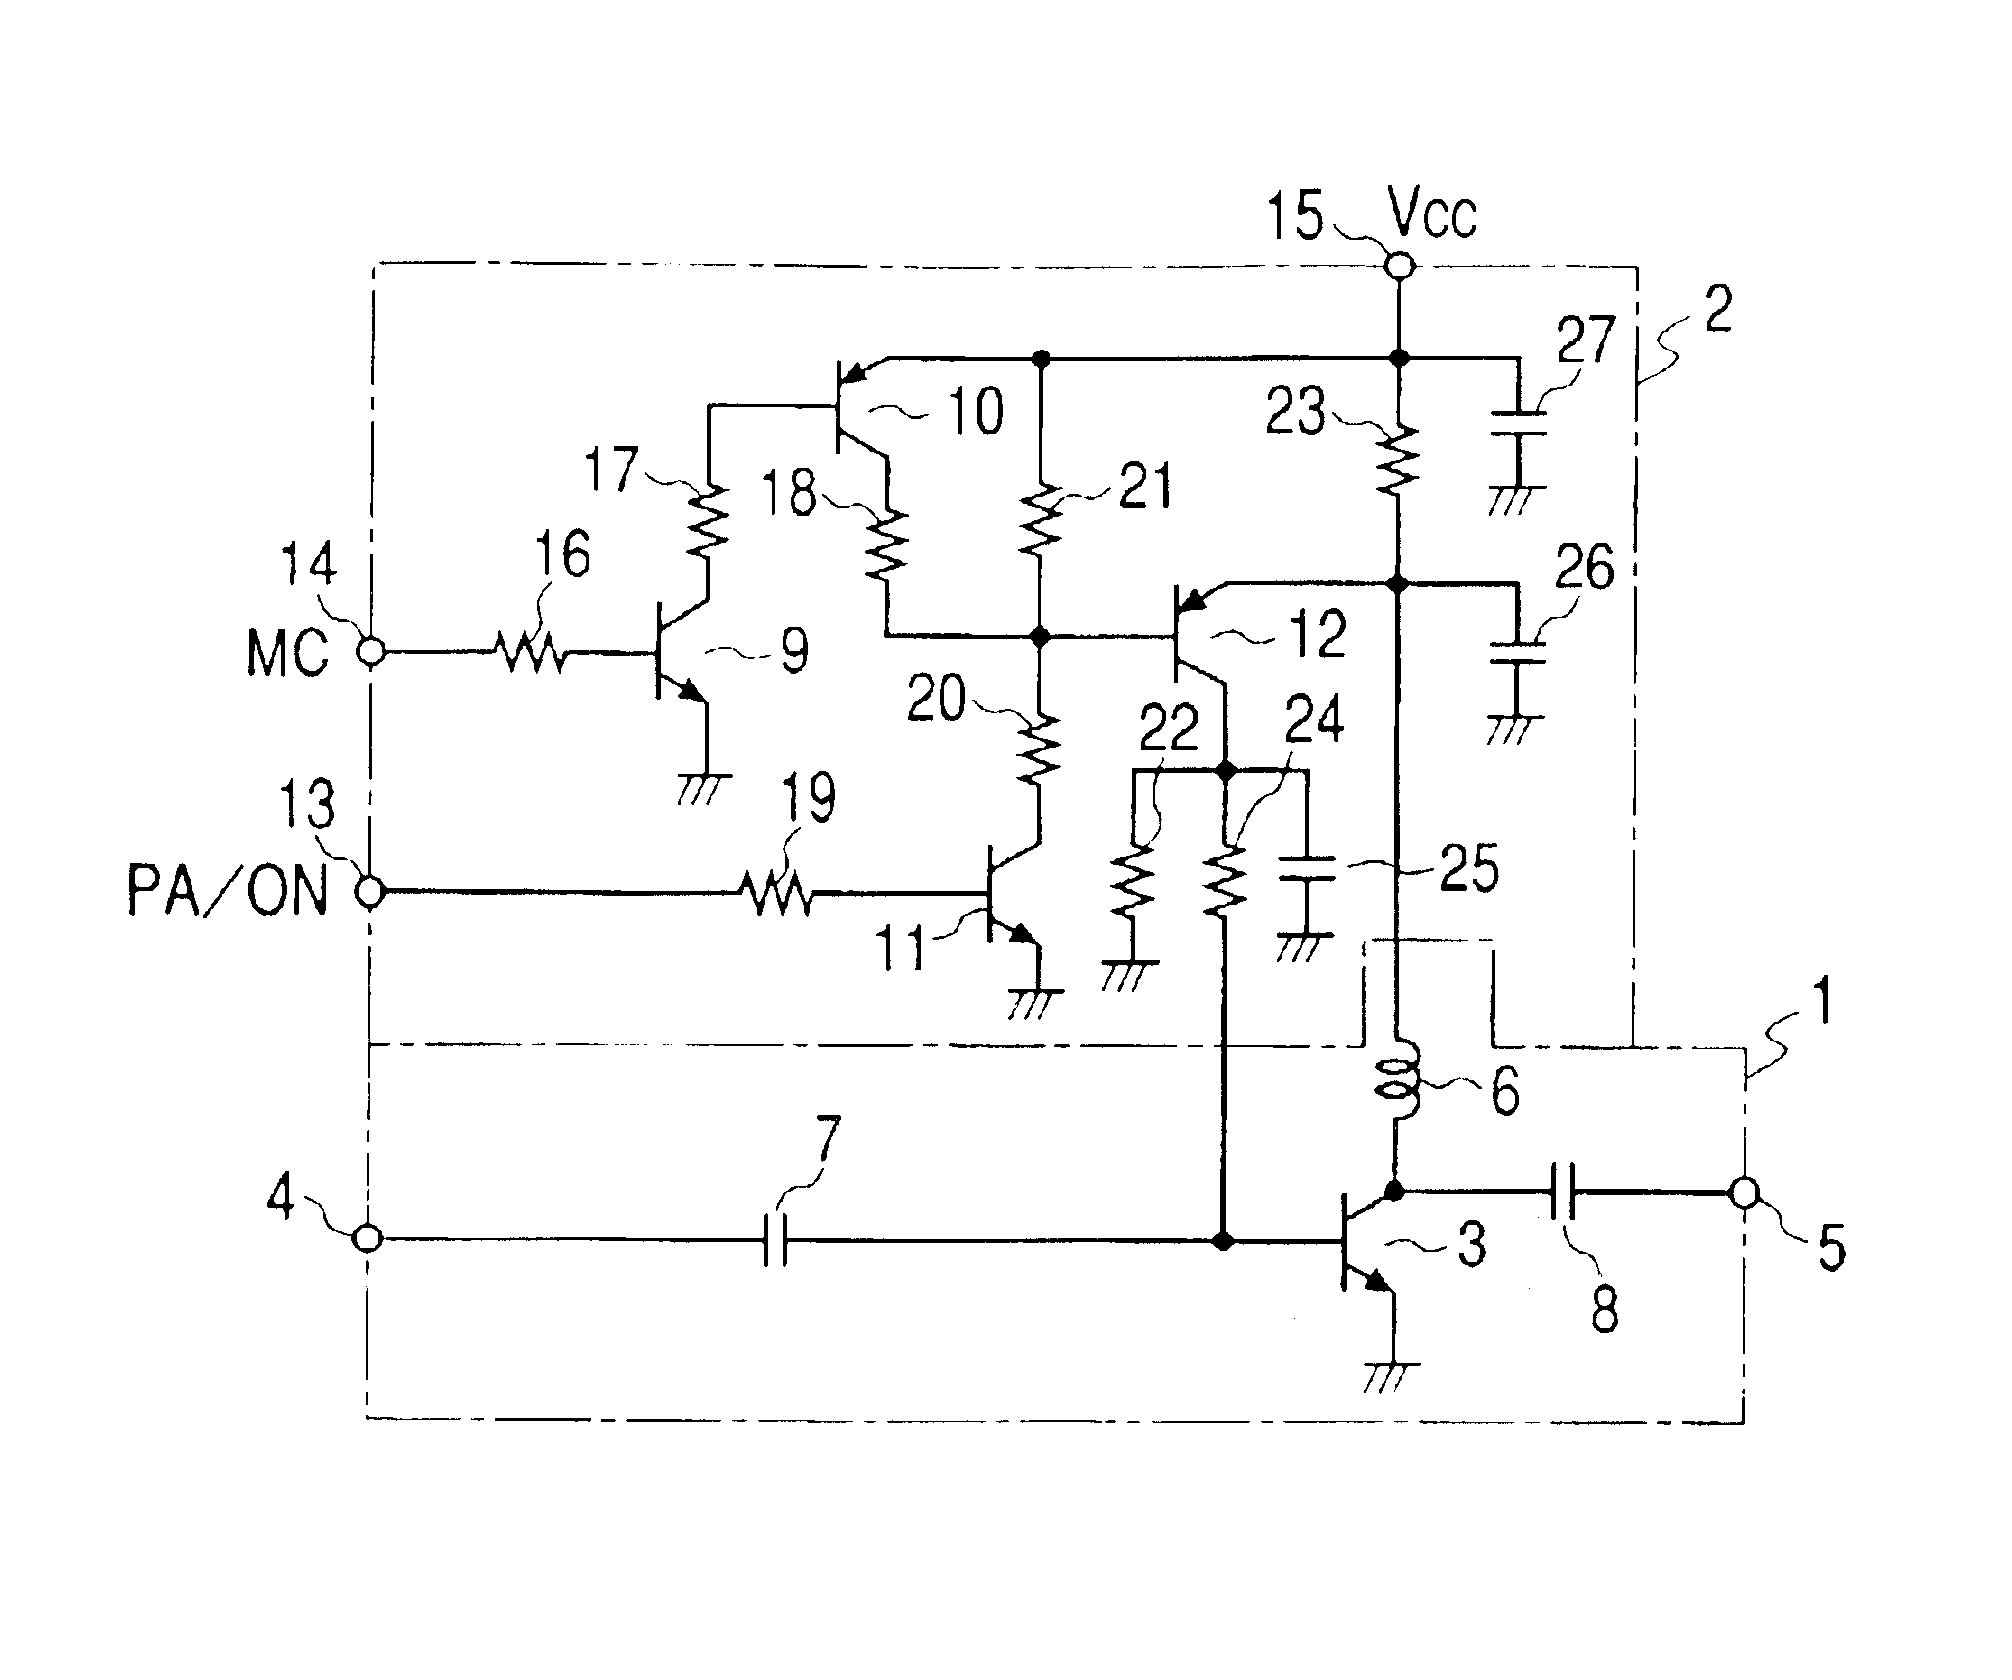 Power amplifier capable of adjusting operating point